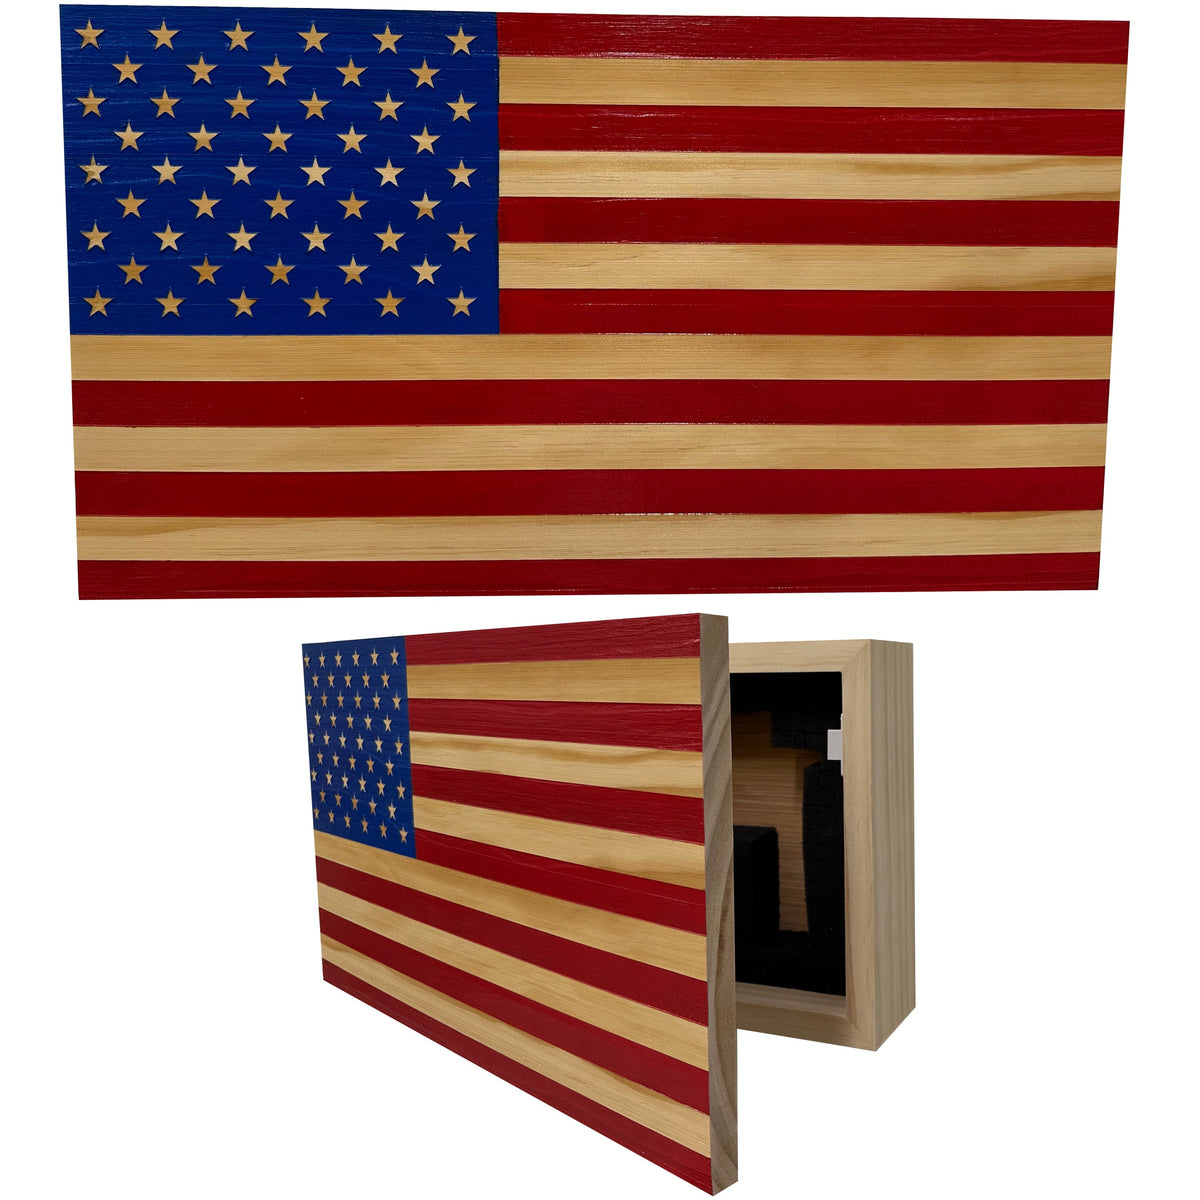 American Flag Decorative & Secure Wall-Mounted Gun Cabinet (Red & Blue)